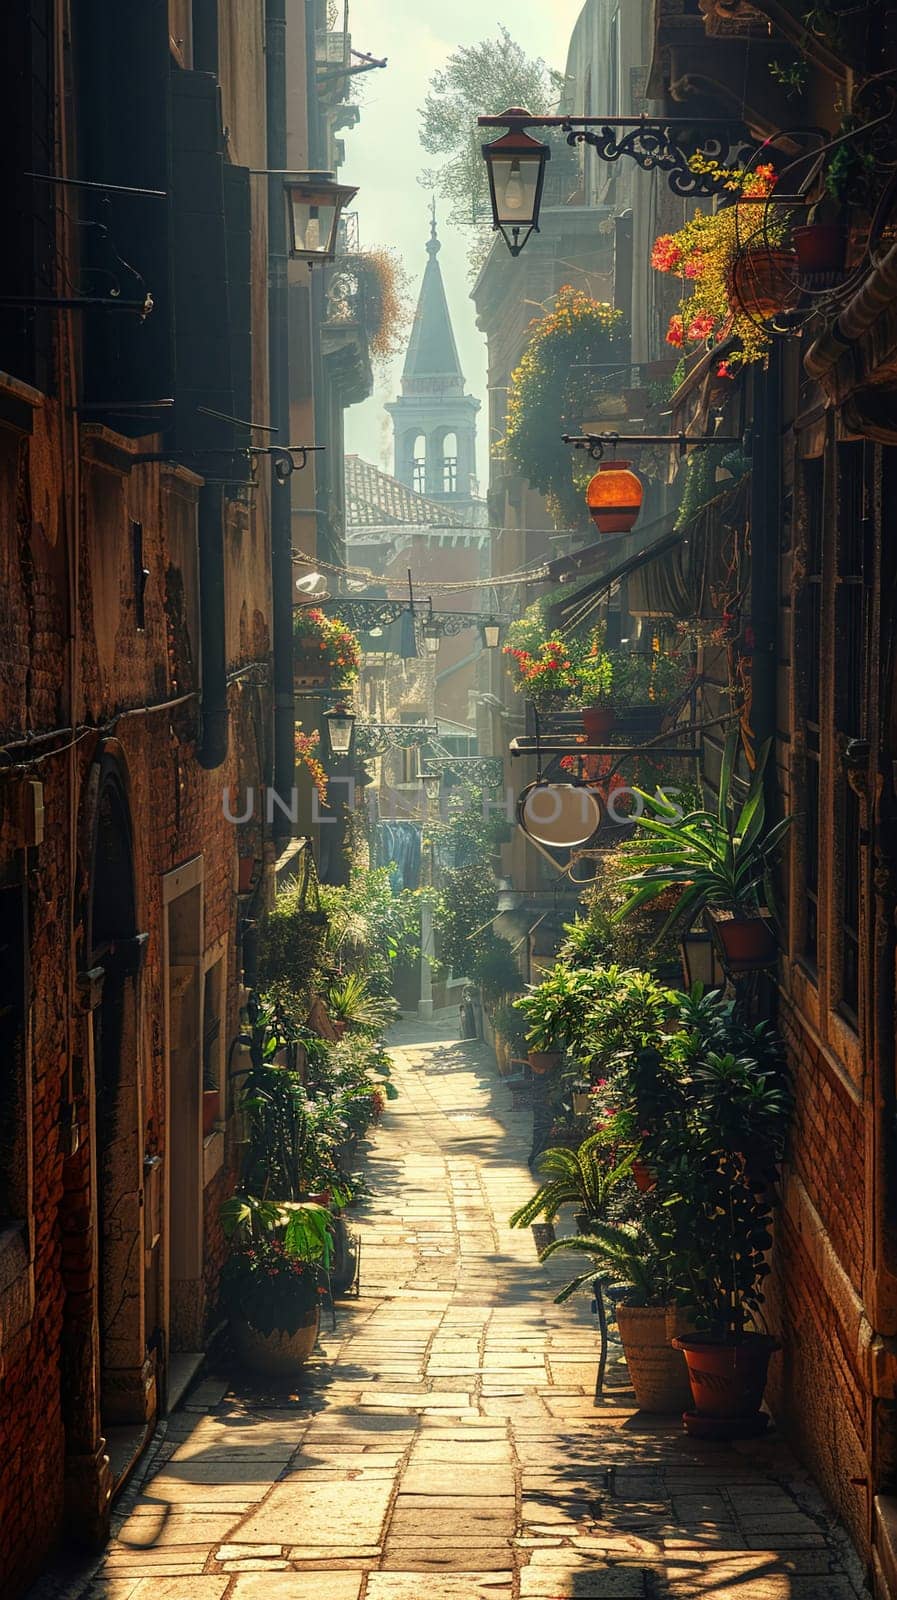 A narrow alley bathed in warm sunlight, flanked by historic buildings, evoking curiosity and exploration.